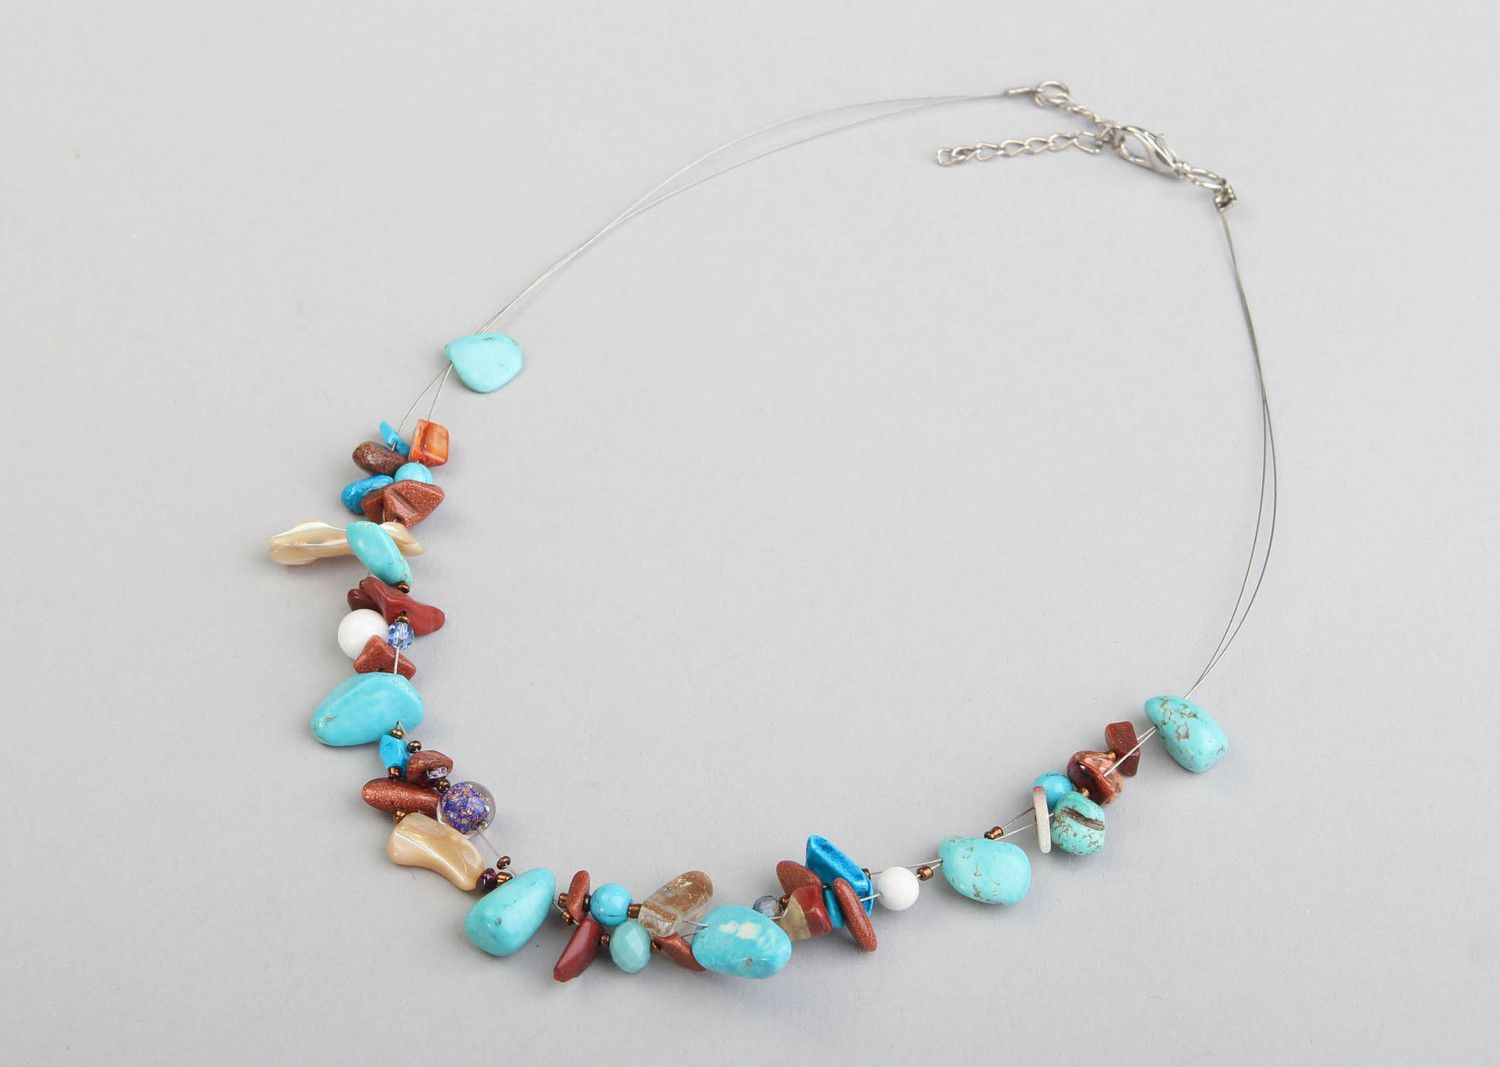 Necklace made of colorful natural stones photo 1